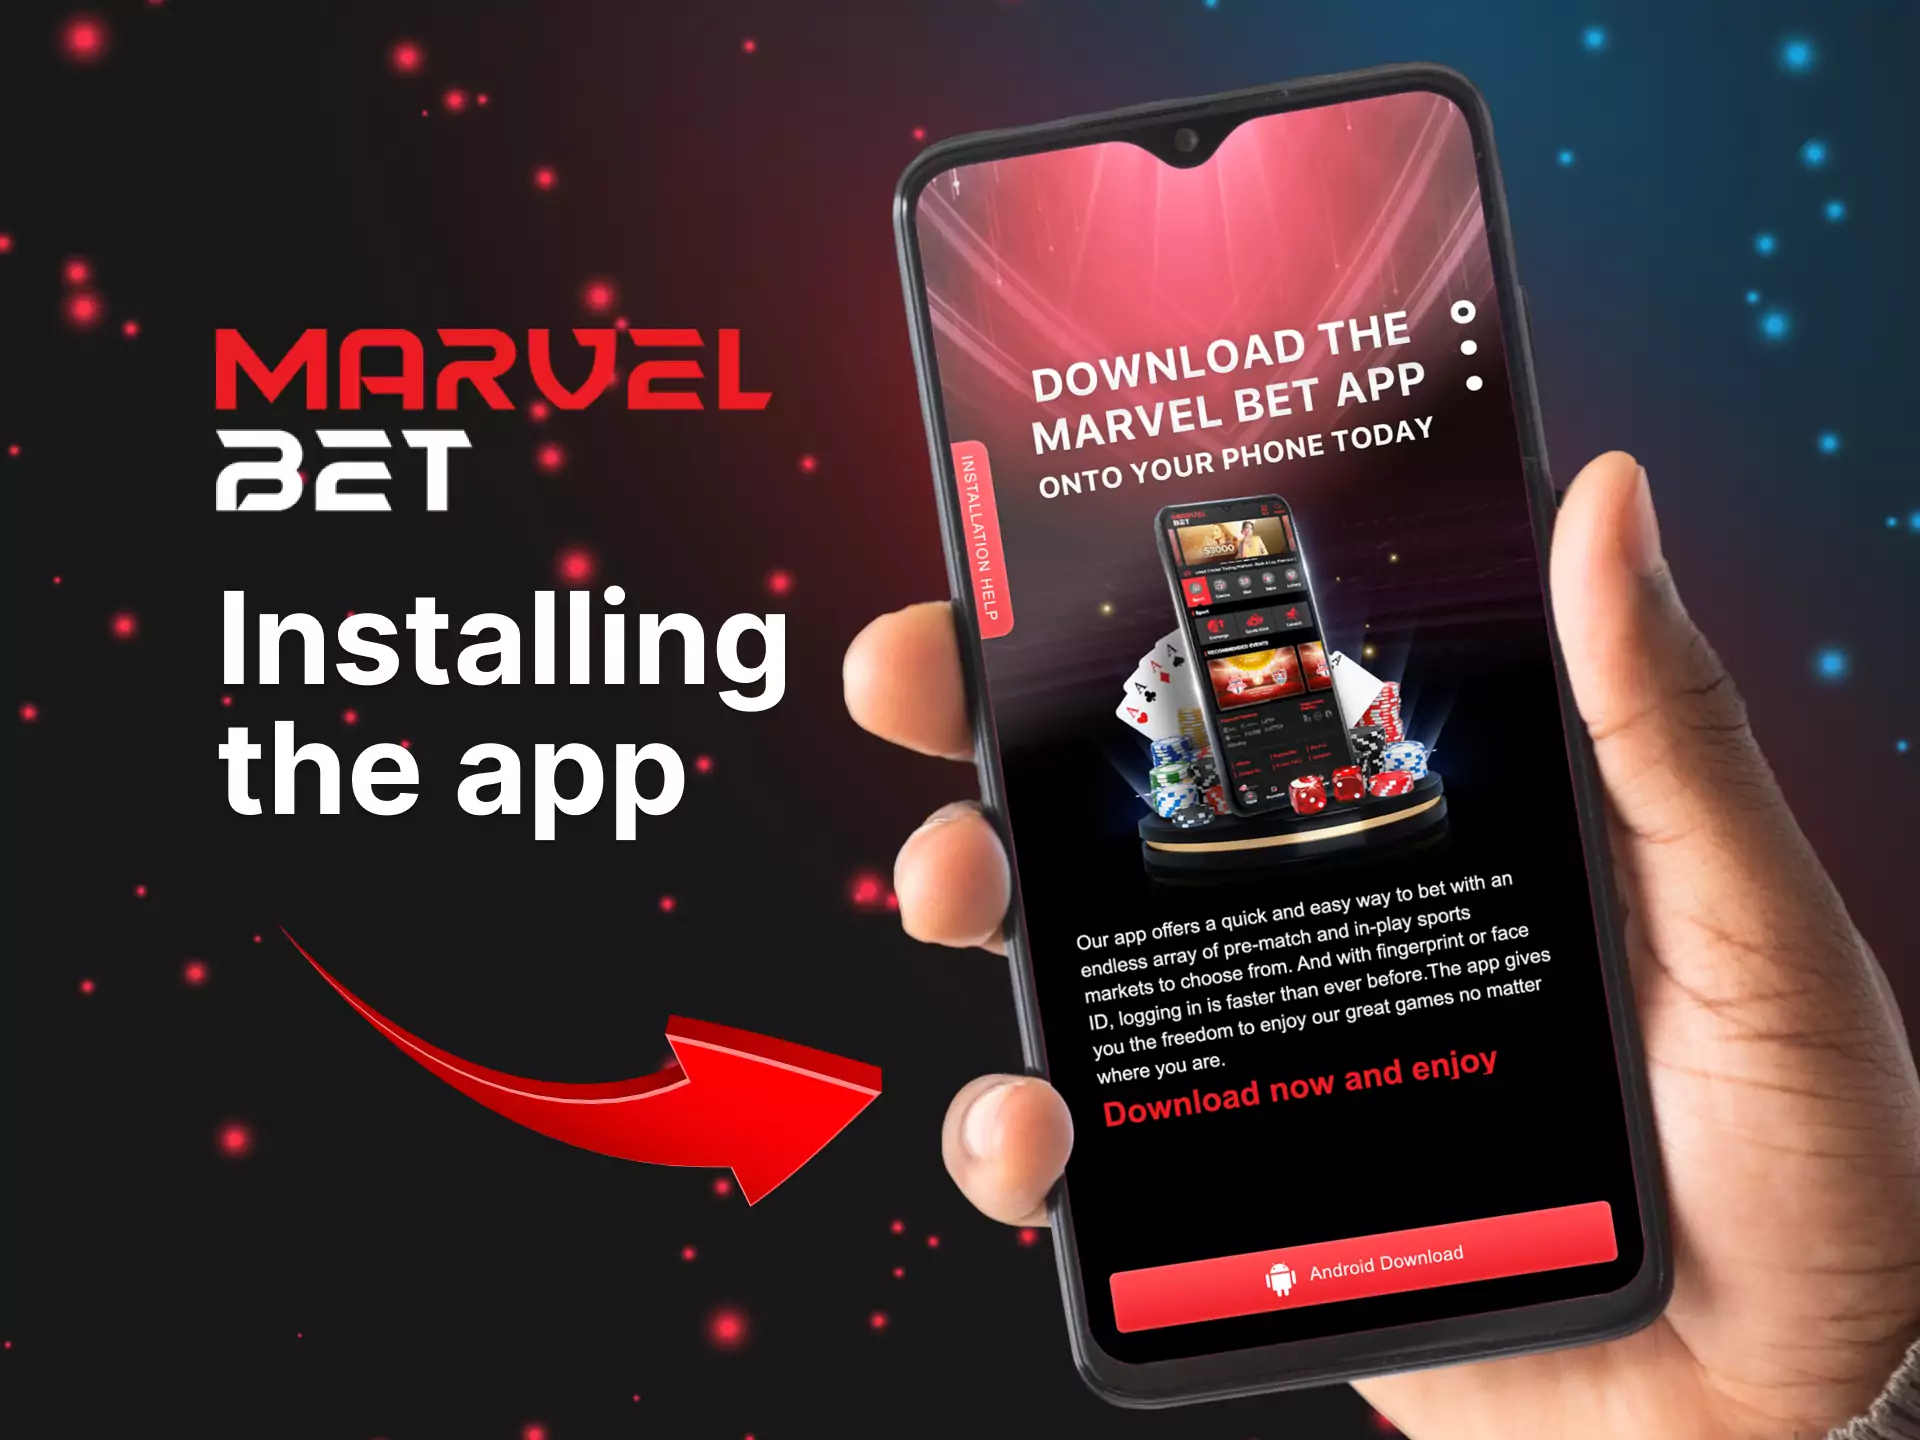 After you download the file, run it to install the Marvelbet app.